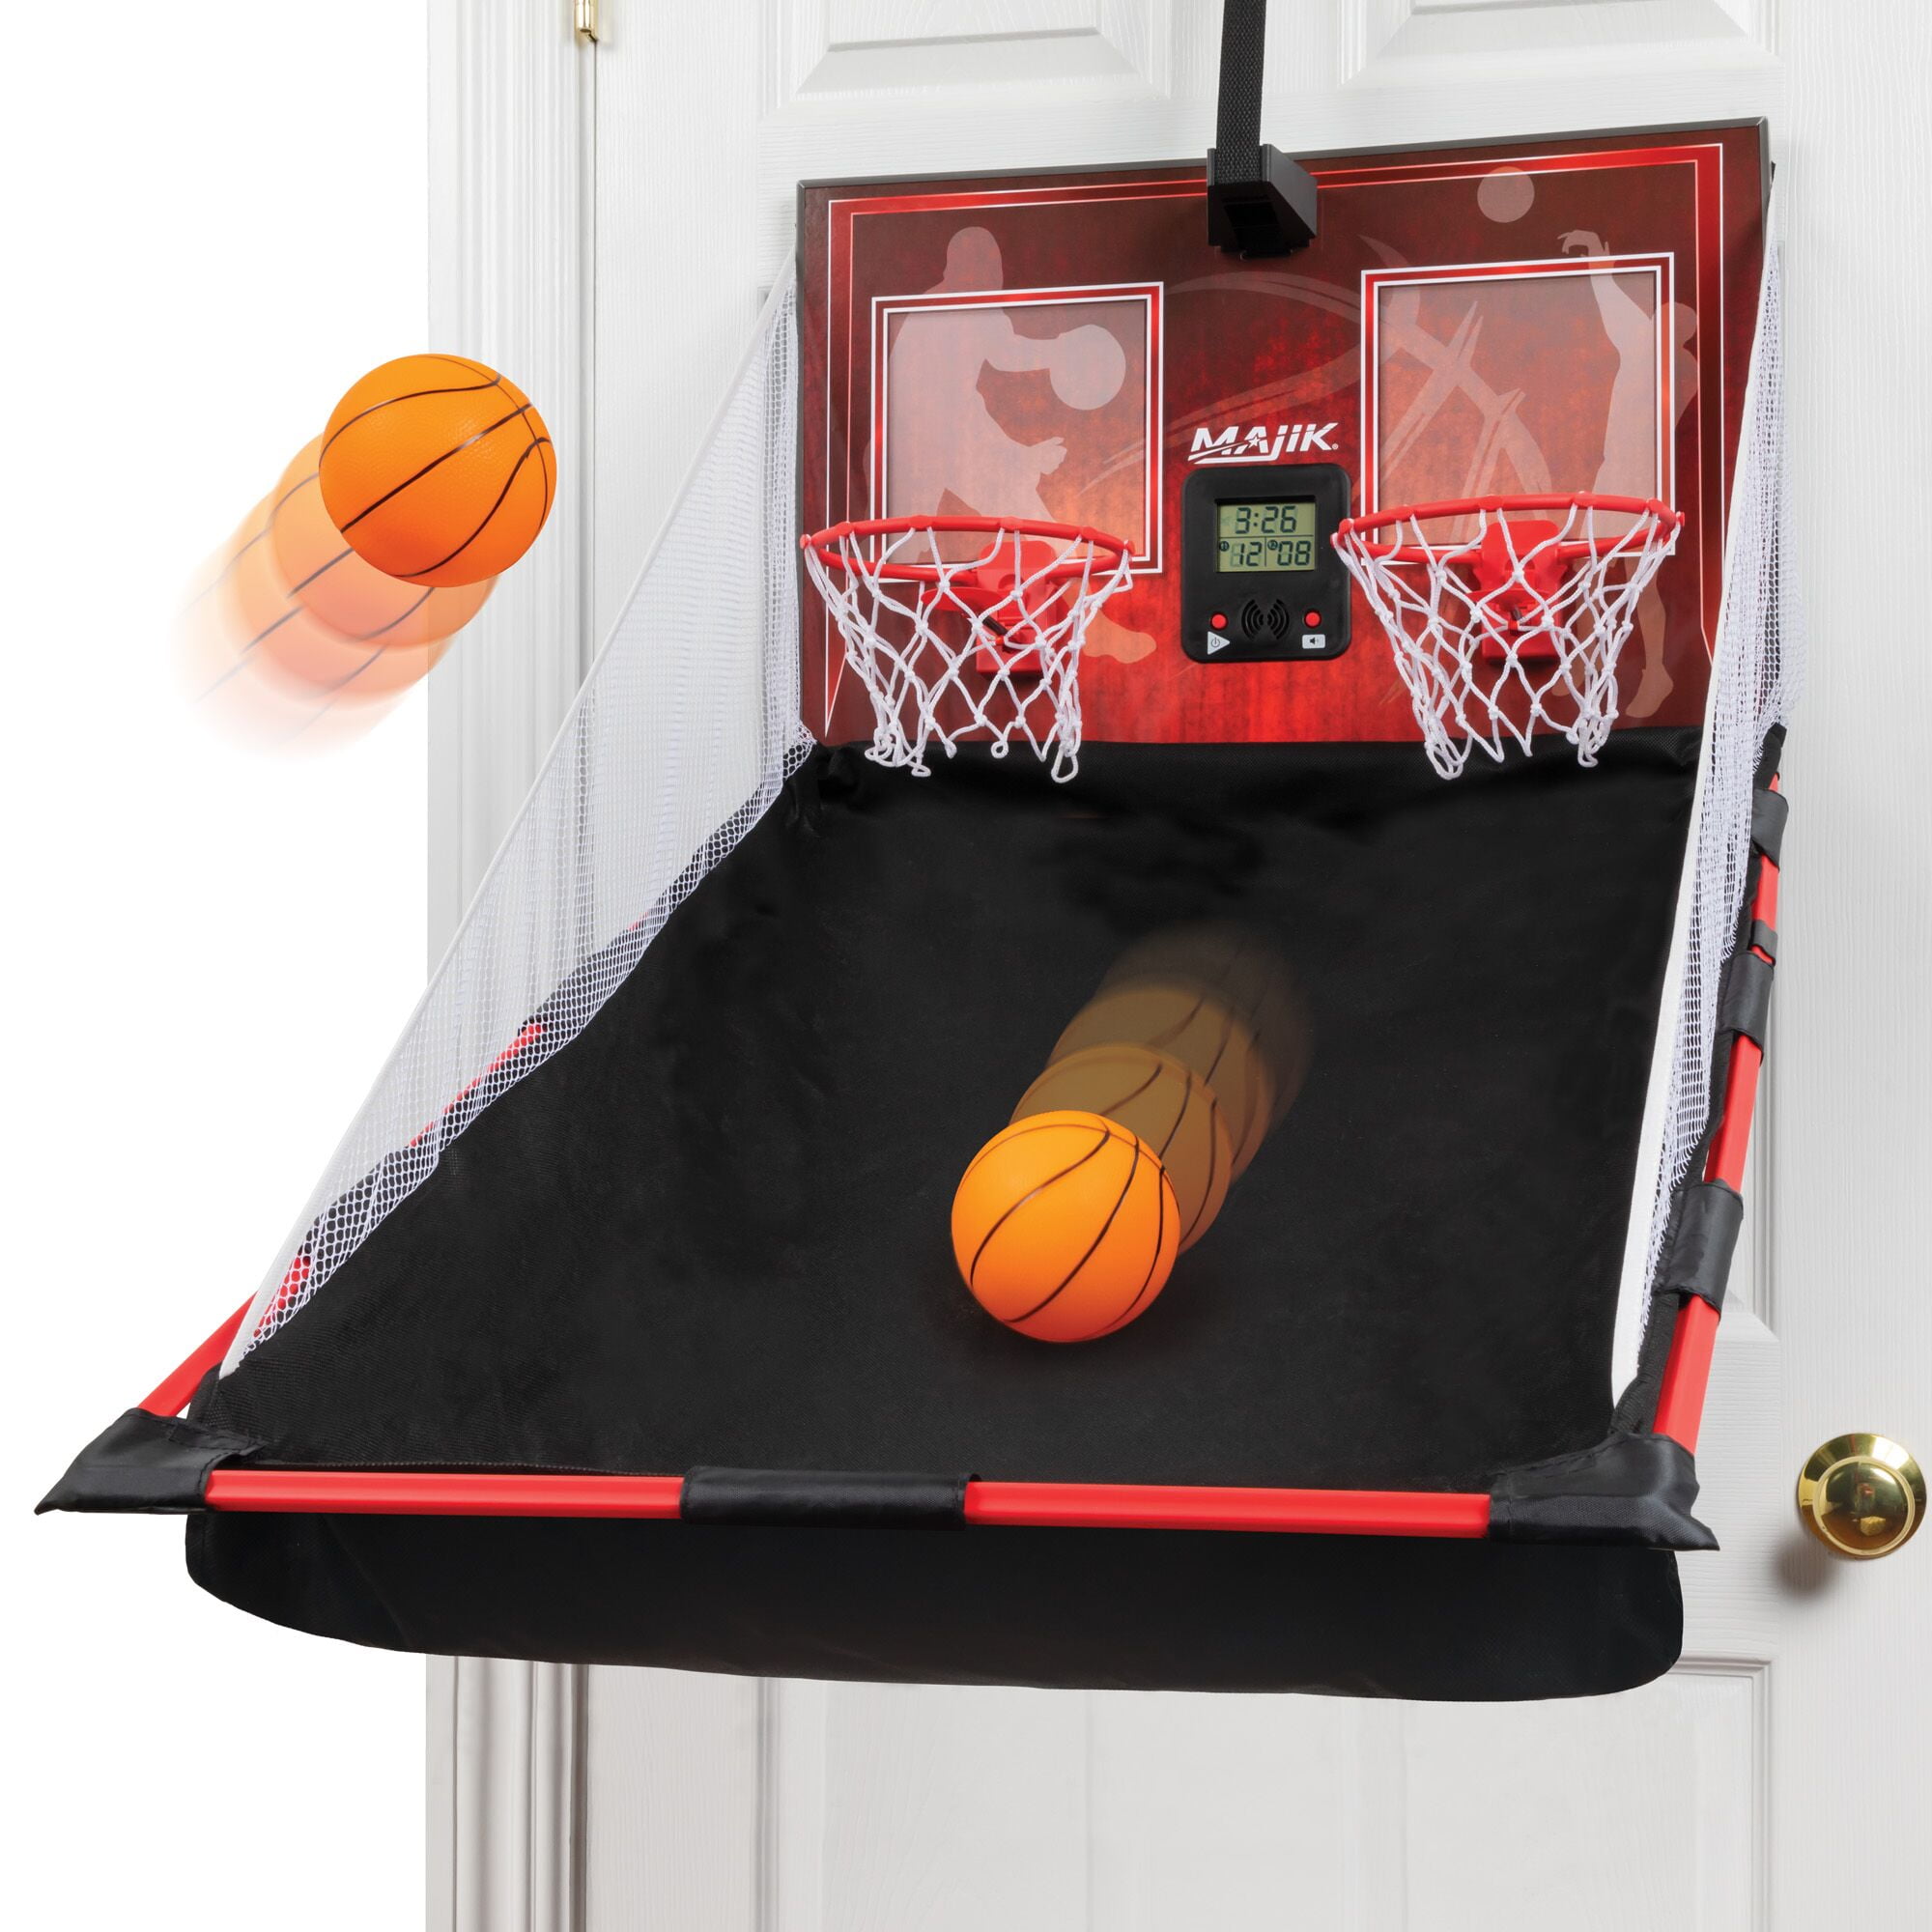 Ball & Pump Included Majik Deluxe Over The Door Basketball Game LED Scoring 